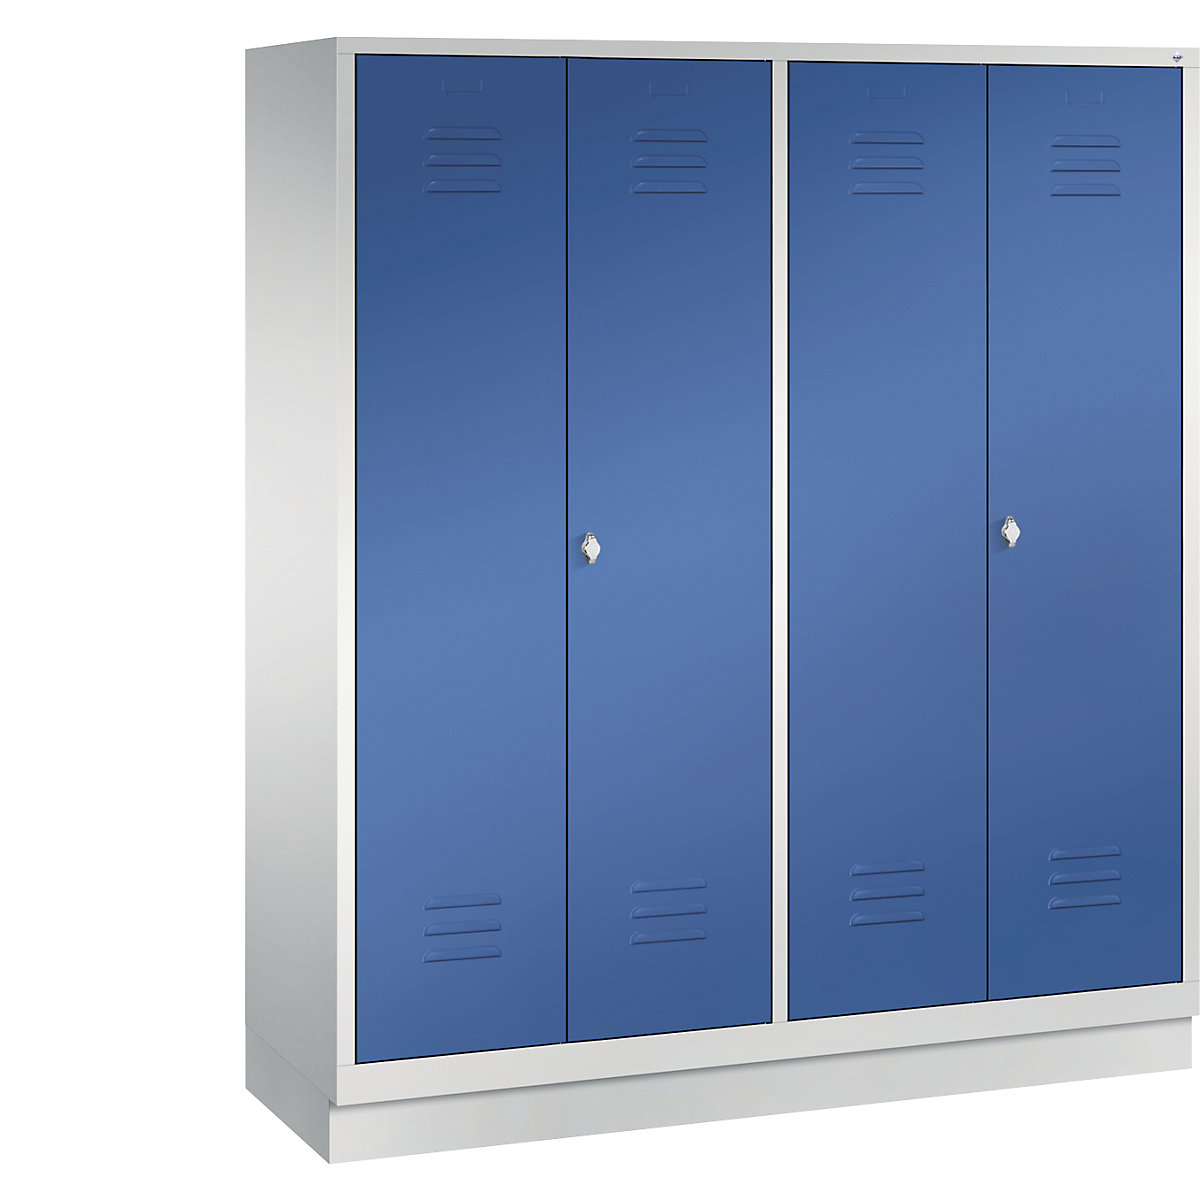 CLASSIC cloakroom locker with plinth, doors close in the middle – C+P, 4 compartments, compartment width 400 mm, light grey / gentian blue-3